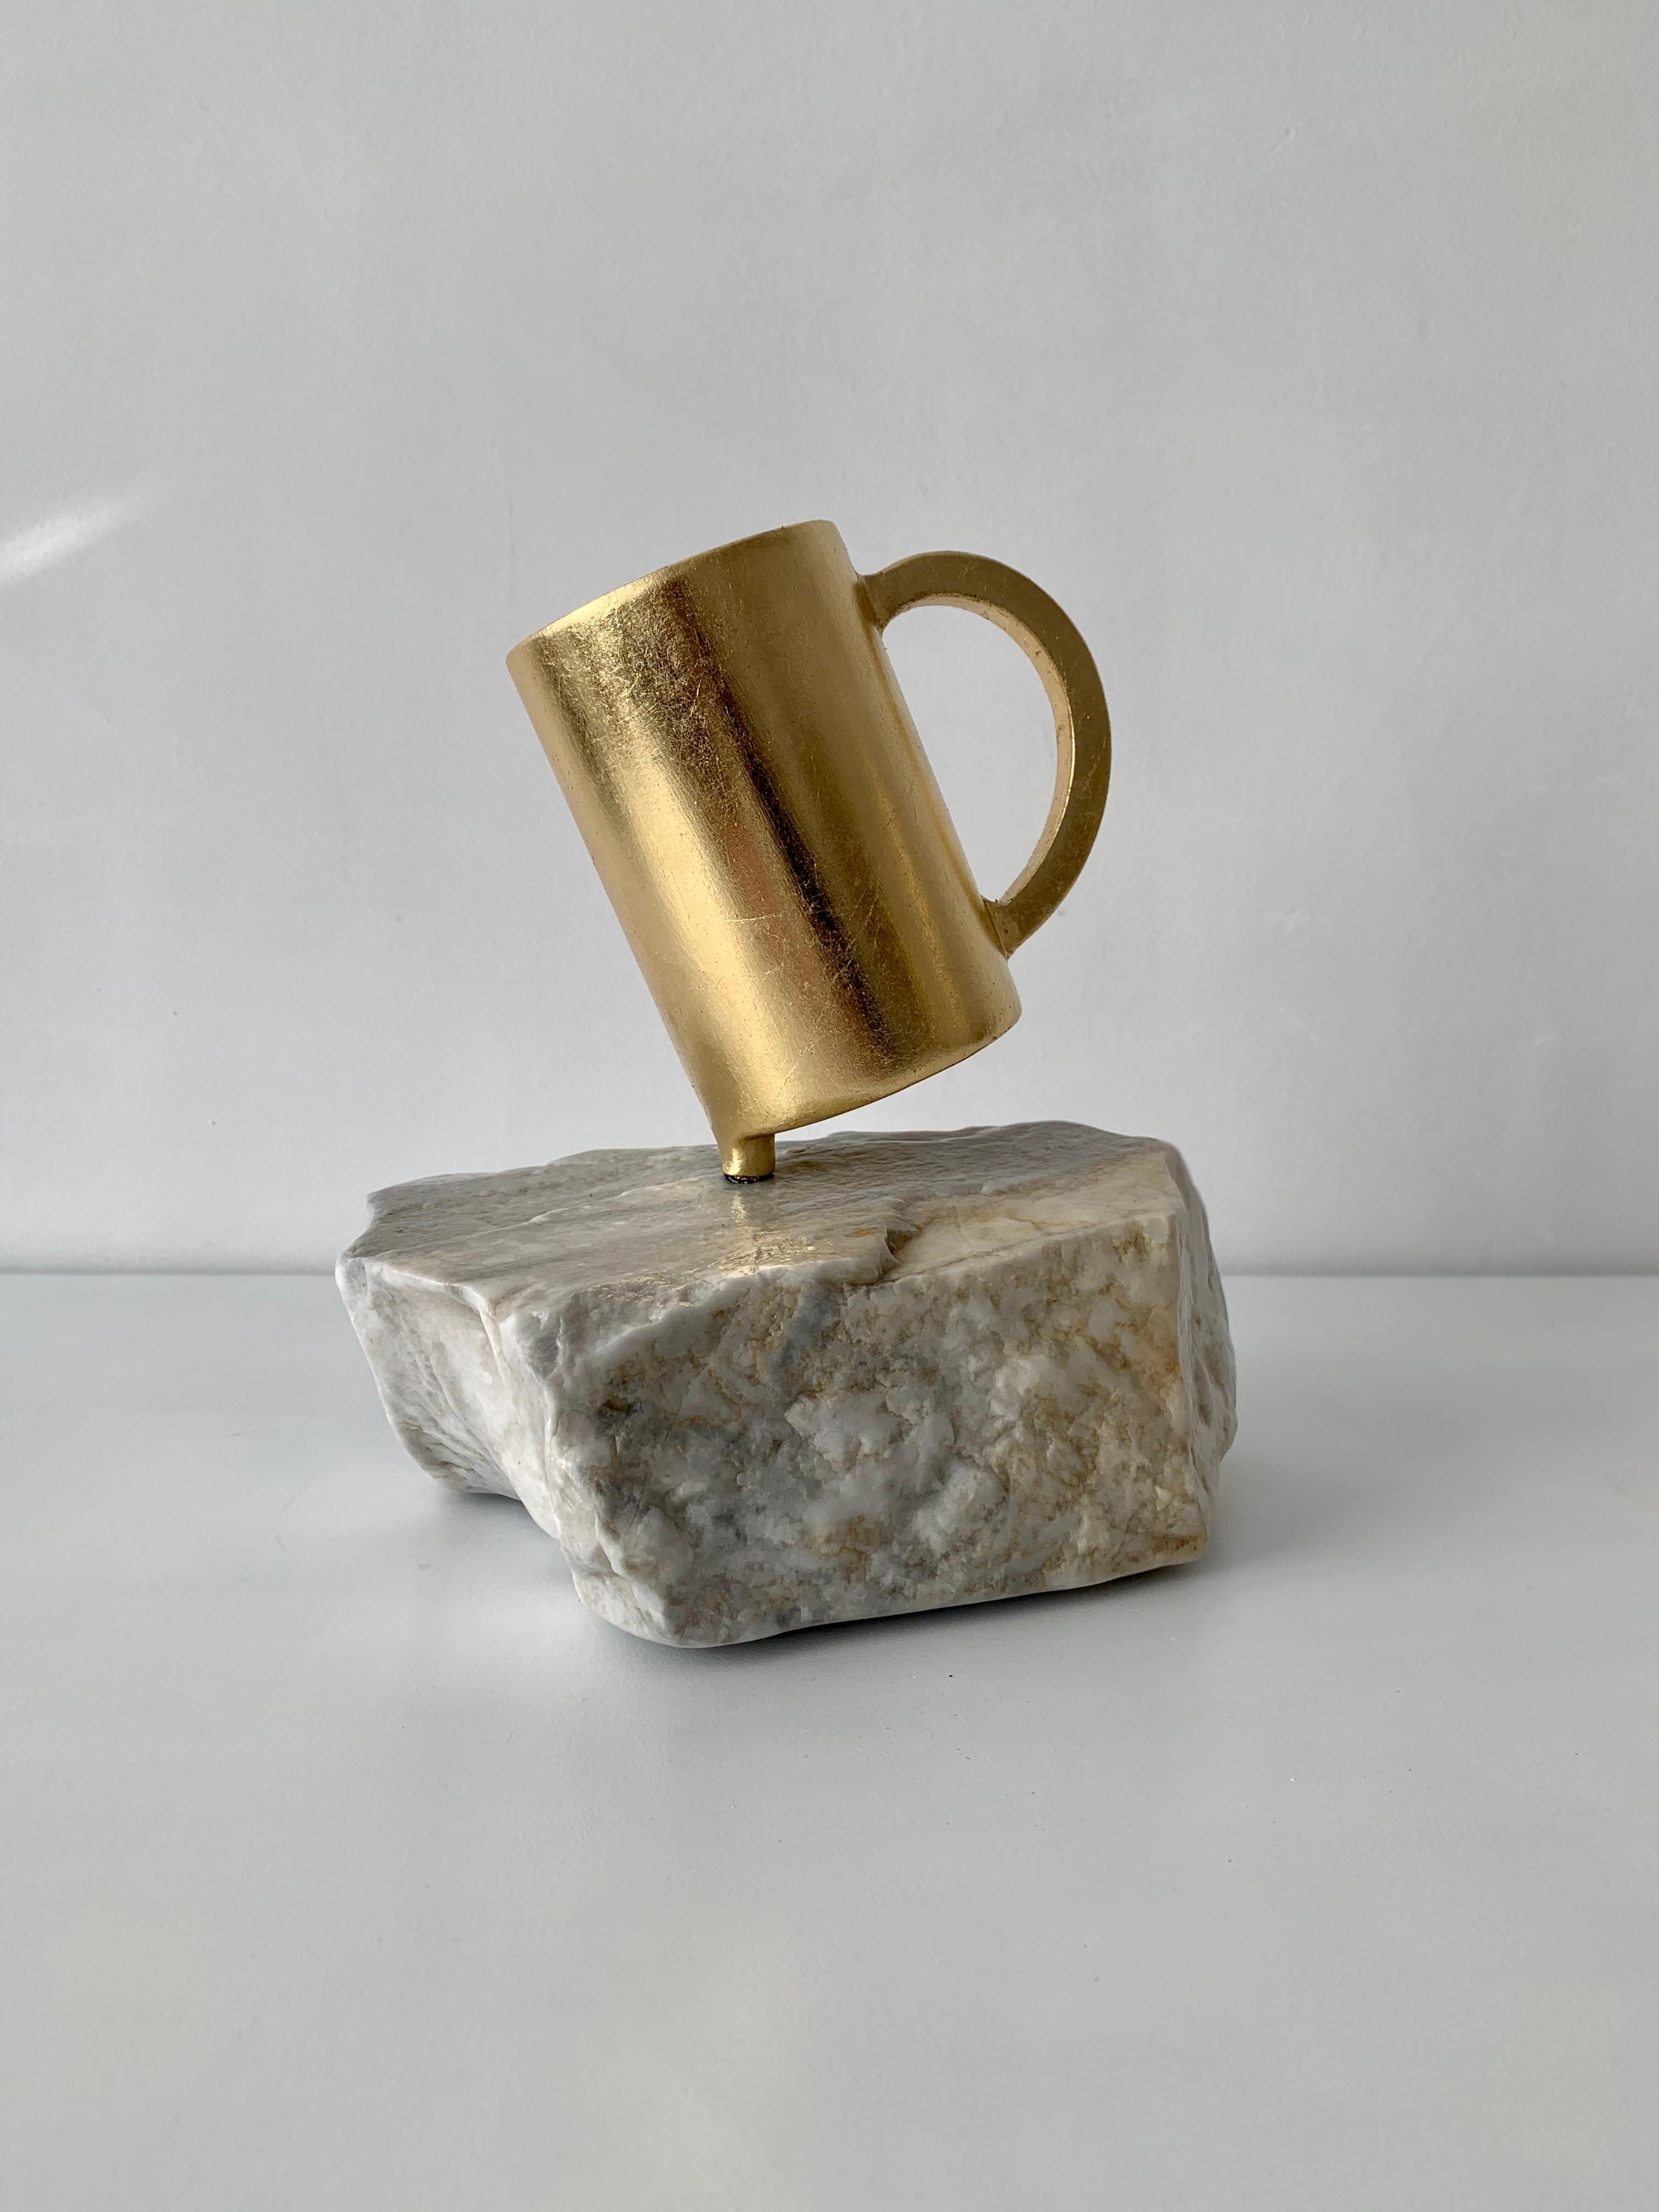 Original Sculpture TEA CUP Gold and White Steel and Marble Office - Gray Figurative Sculpture by Rostyslav Kozhman